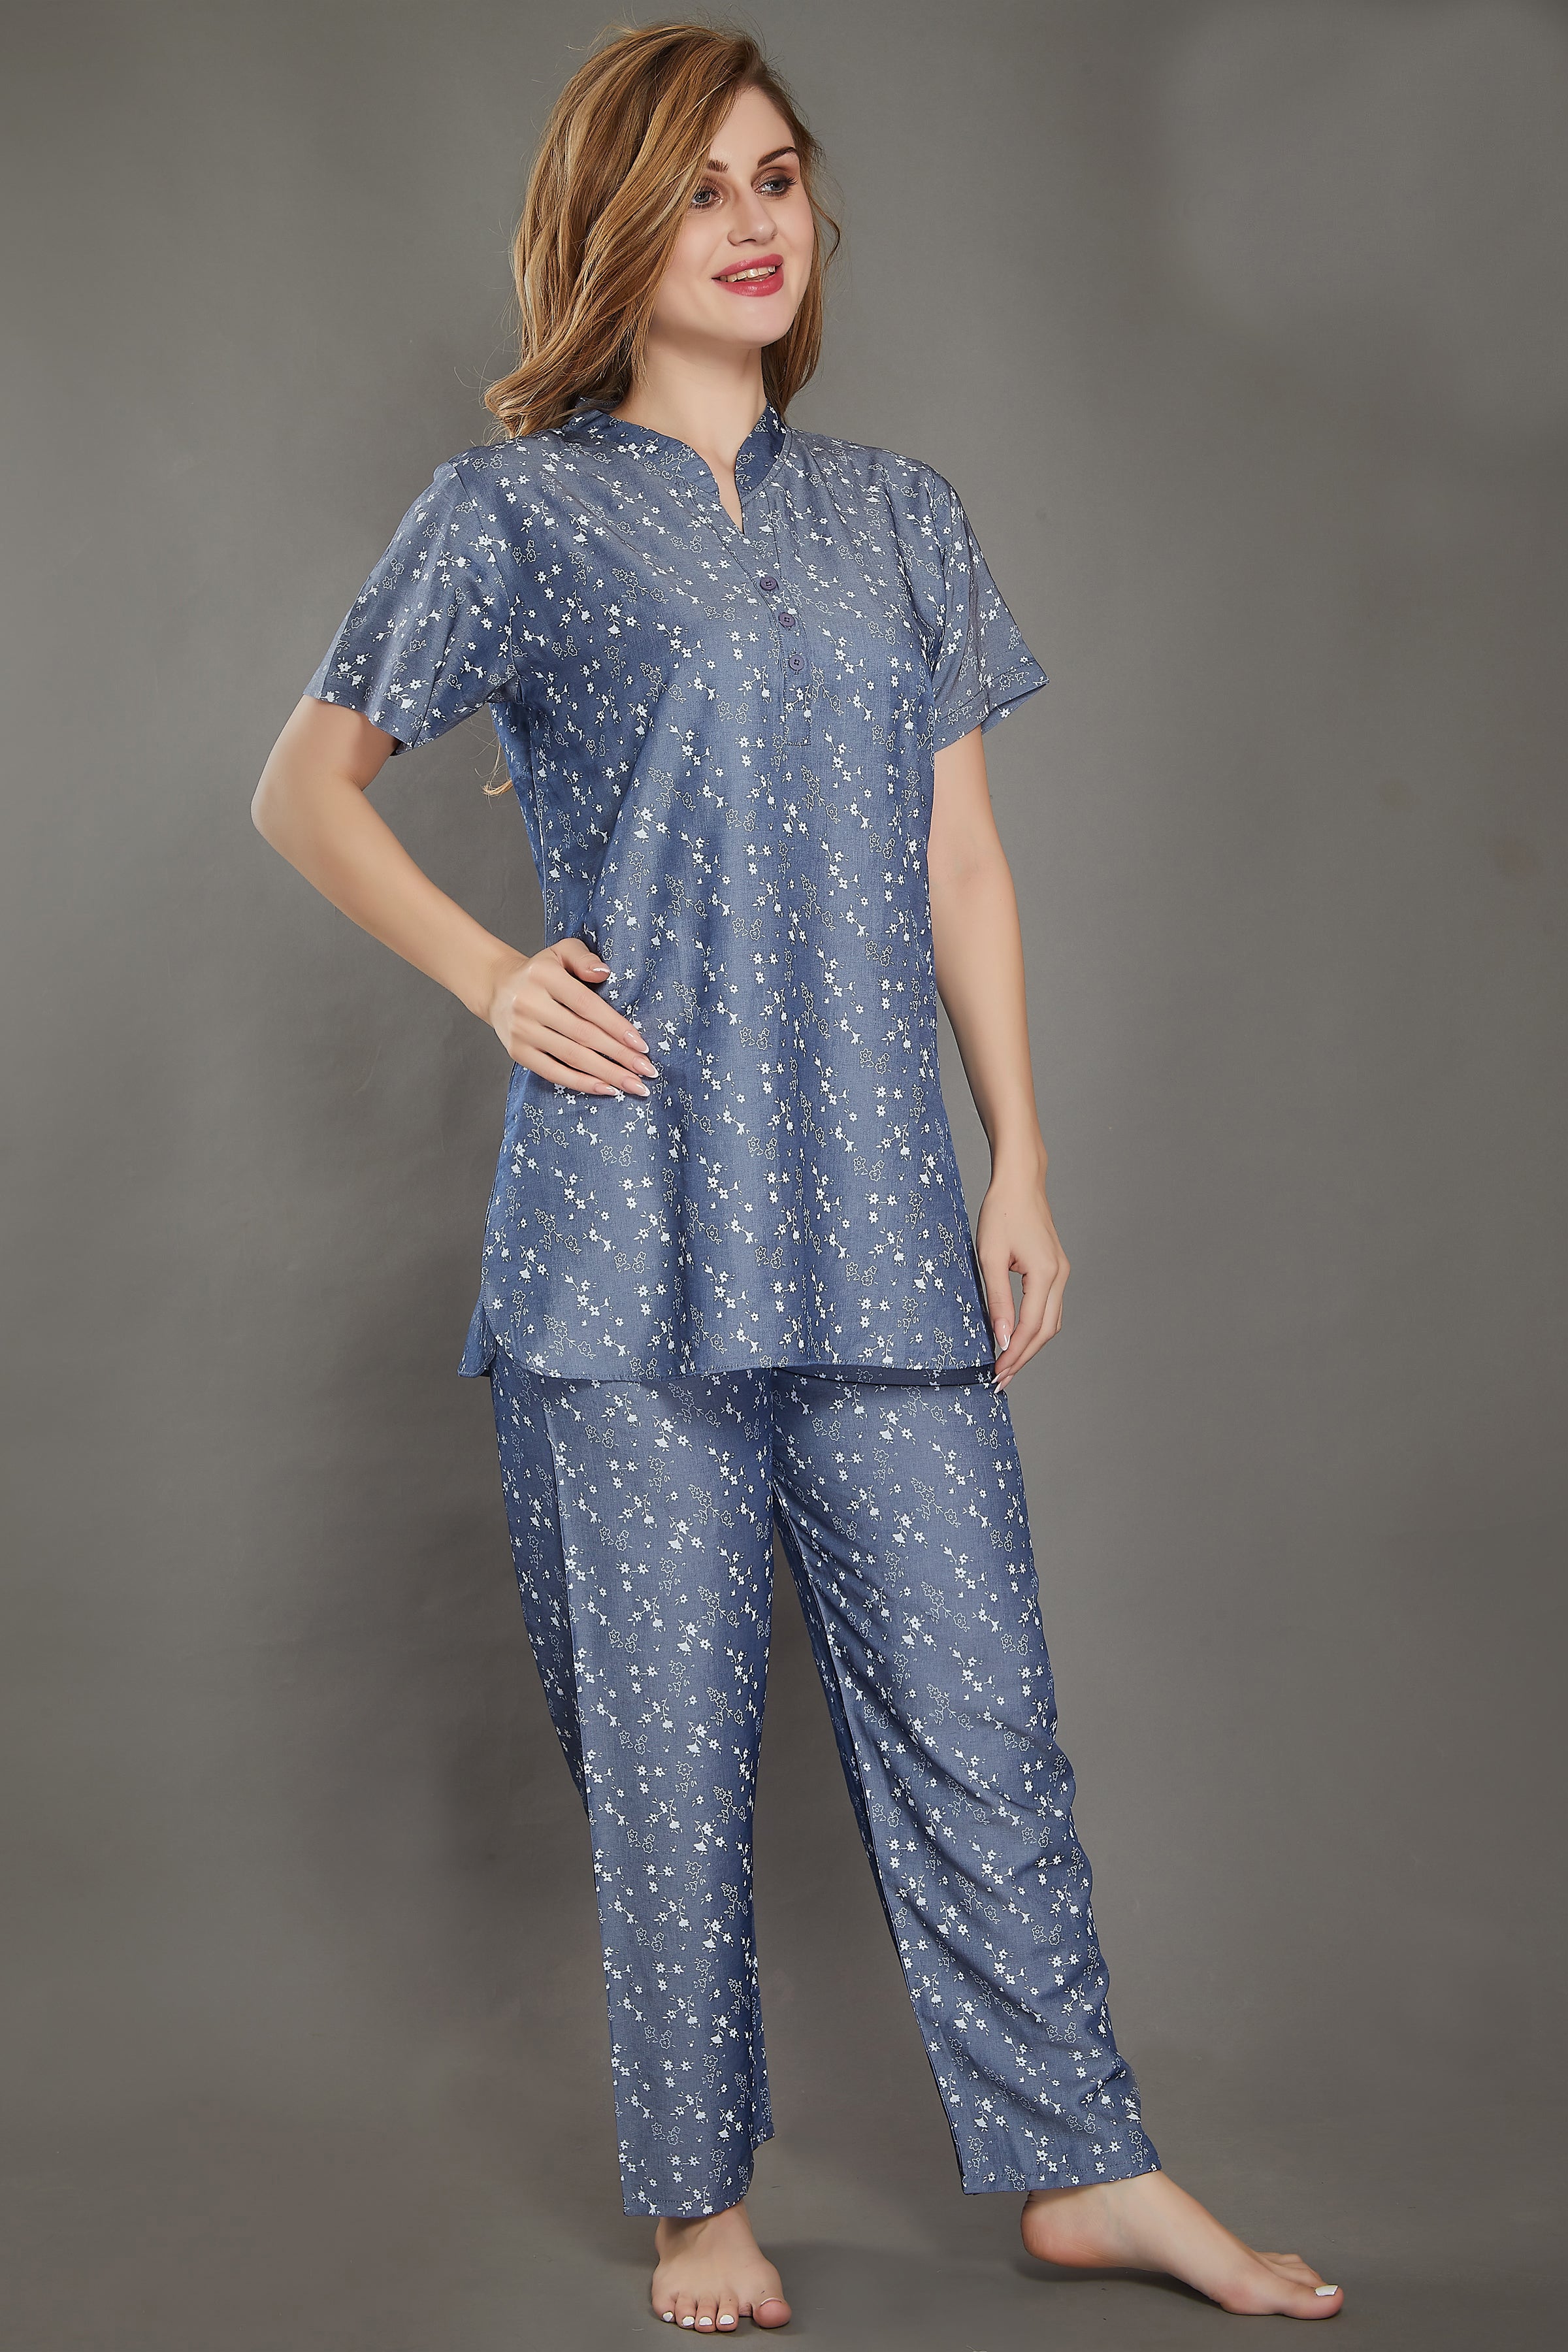 Buy Blue Printed Cotton Night Suit Online at Rs.939 | Libas